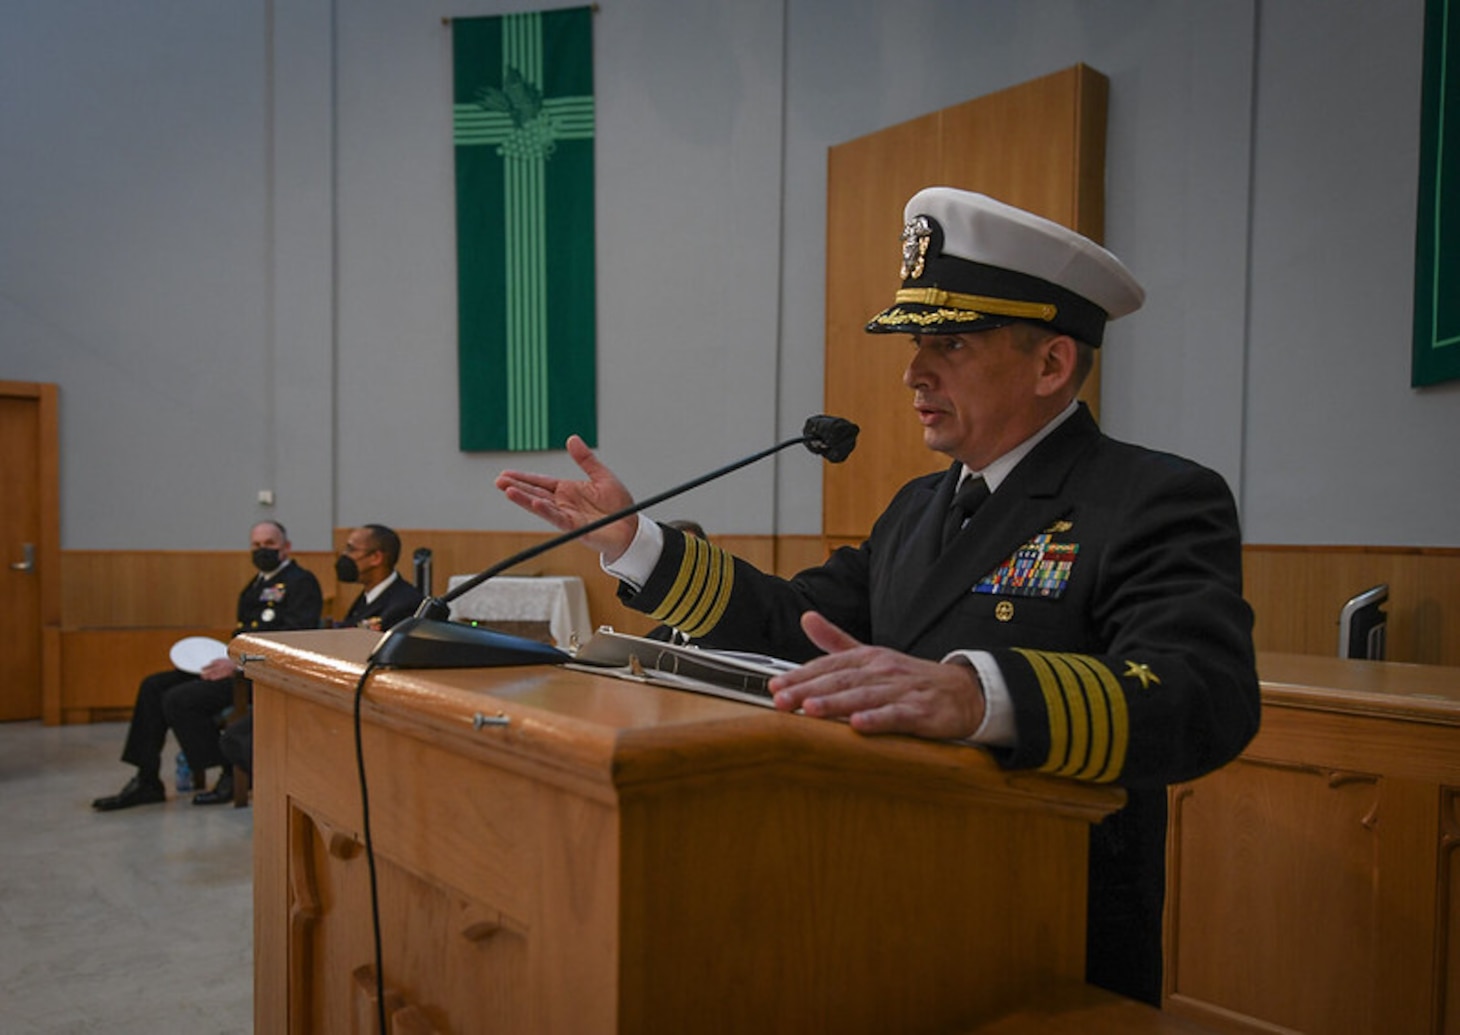 Capt. Kenneth S. Pickard delivers his first speech as Commodore, Commander, Task Force 63, during a change of command ceremony held at Naval Support Activity Naples, Italy, Jan. 21, 2022. U.S. Naval Forces Europe and Africa, headquartered in Naples, Italy, conducts the full spectrum of joint and naval operations, often in concert with allied and interagency partners, in order to advance U.S. national interests, security and stability in Europe and Africa.